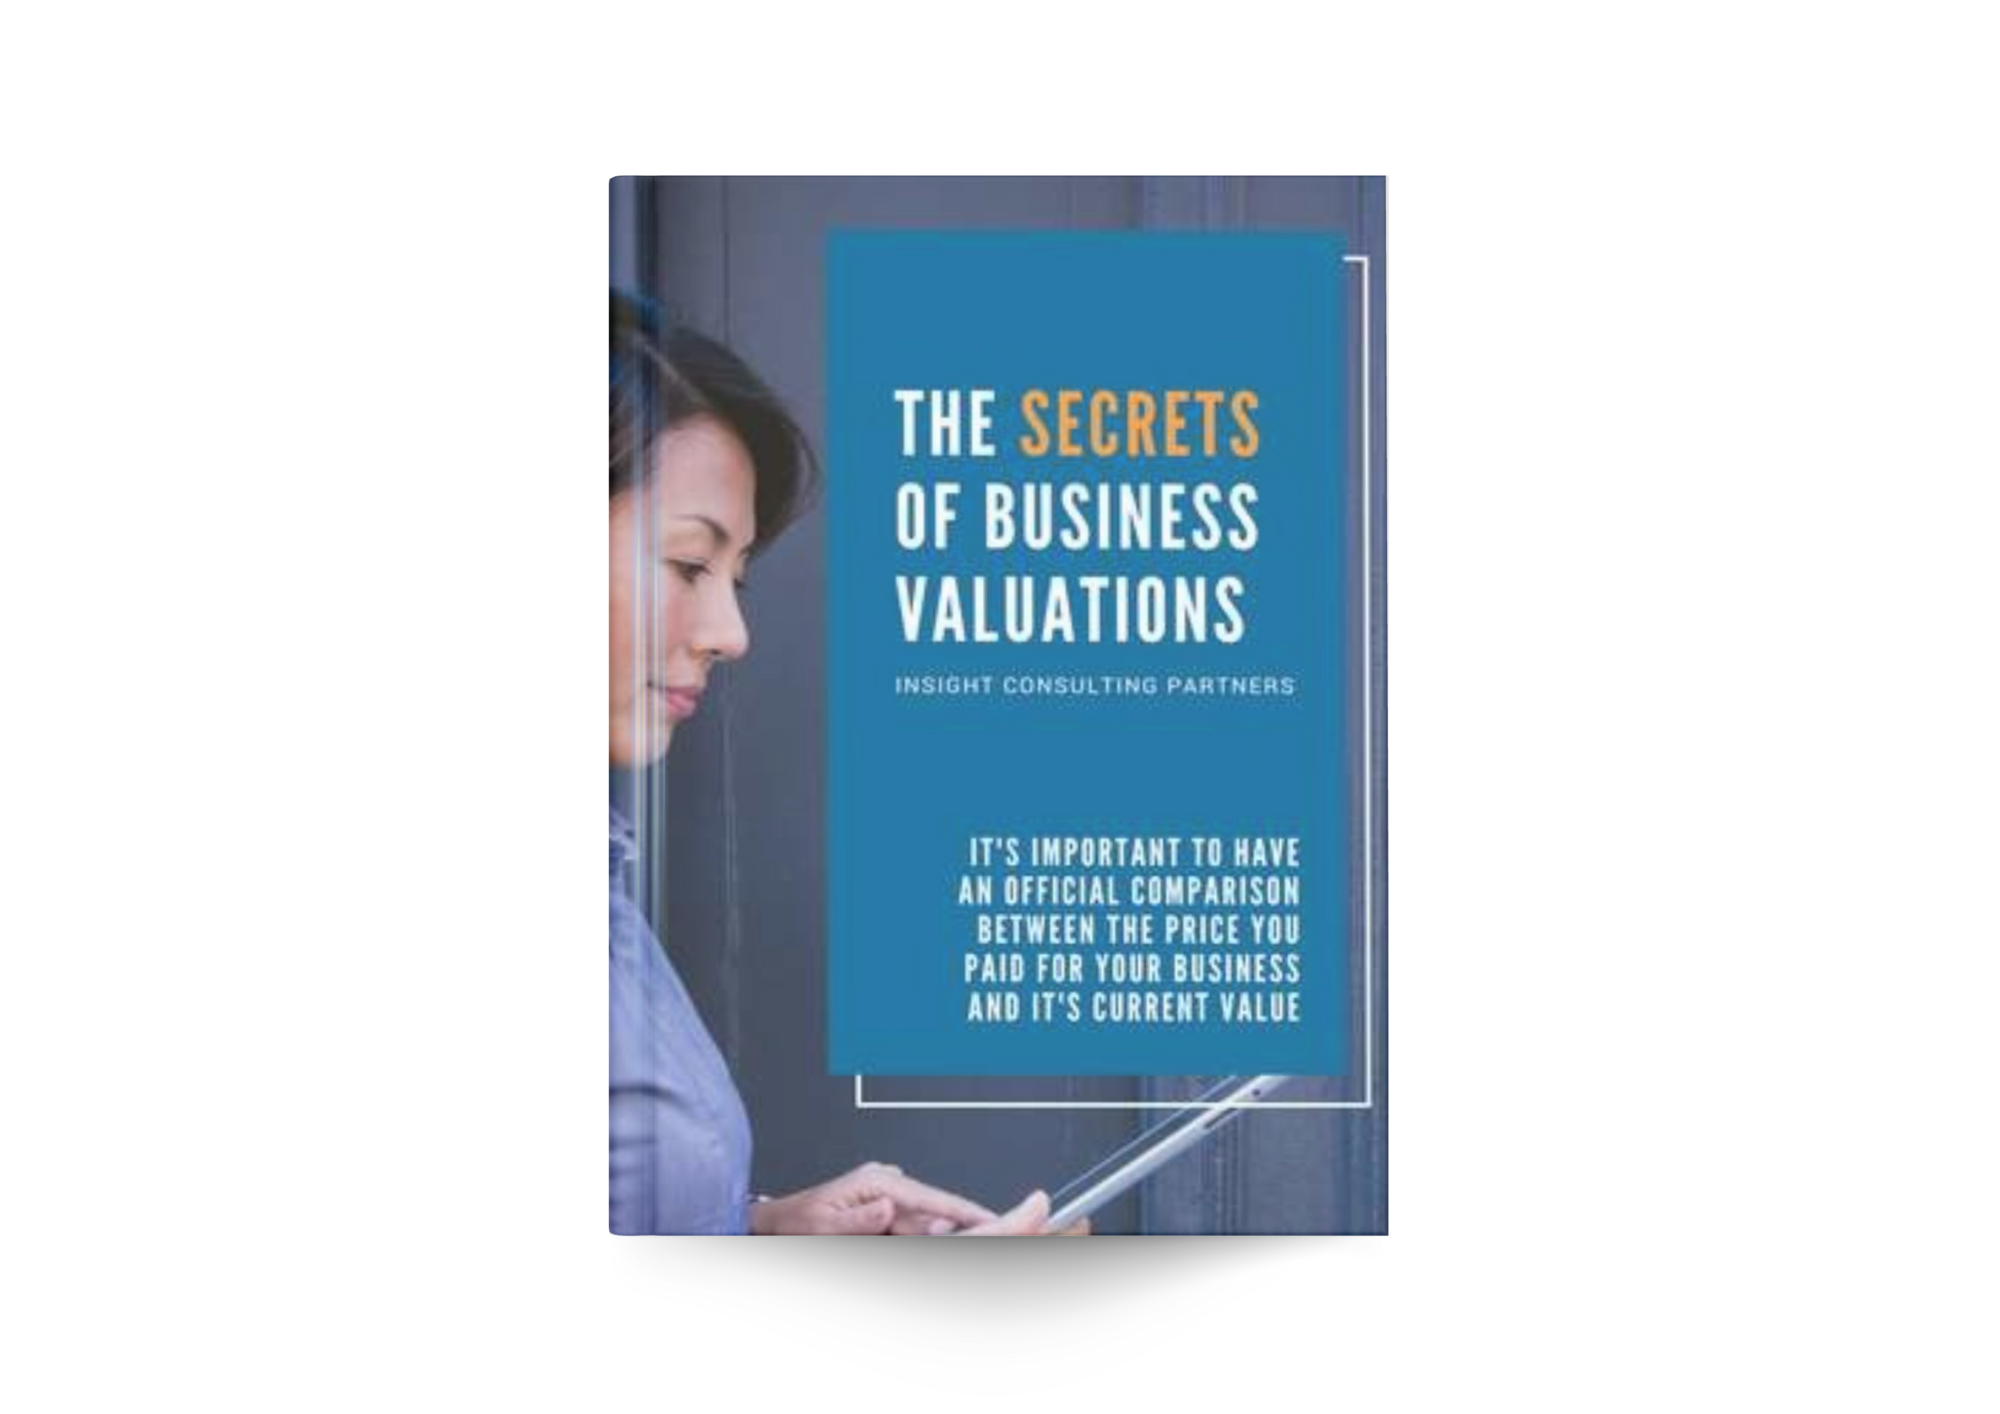 The Secrets of Business Valuations